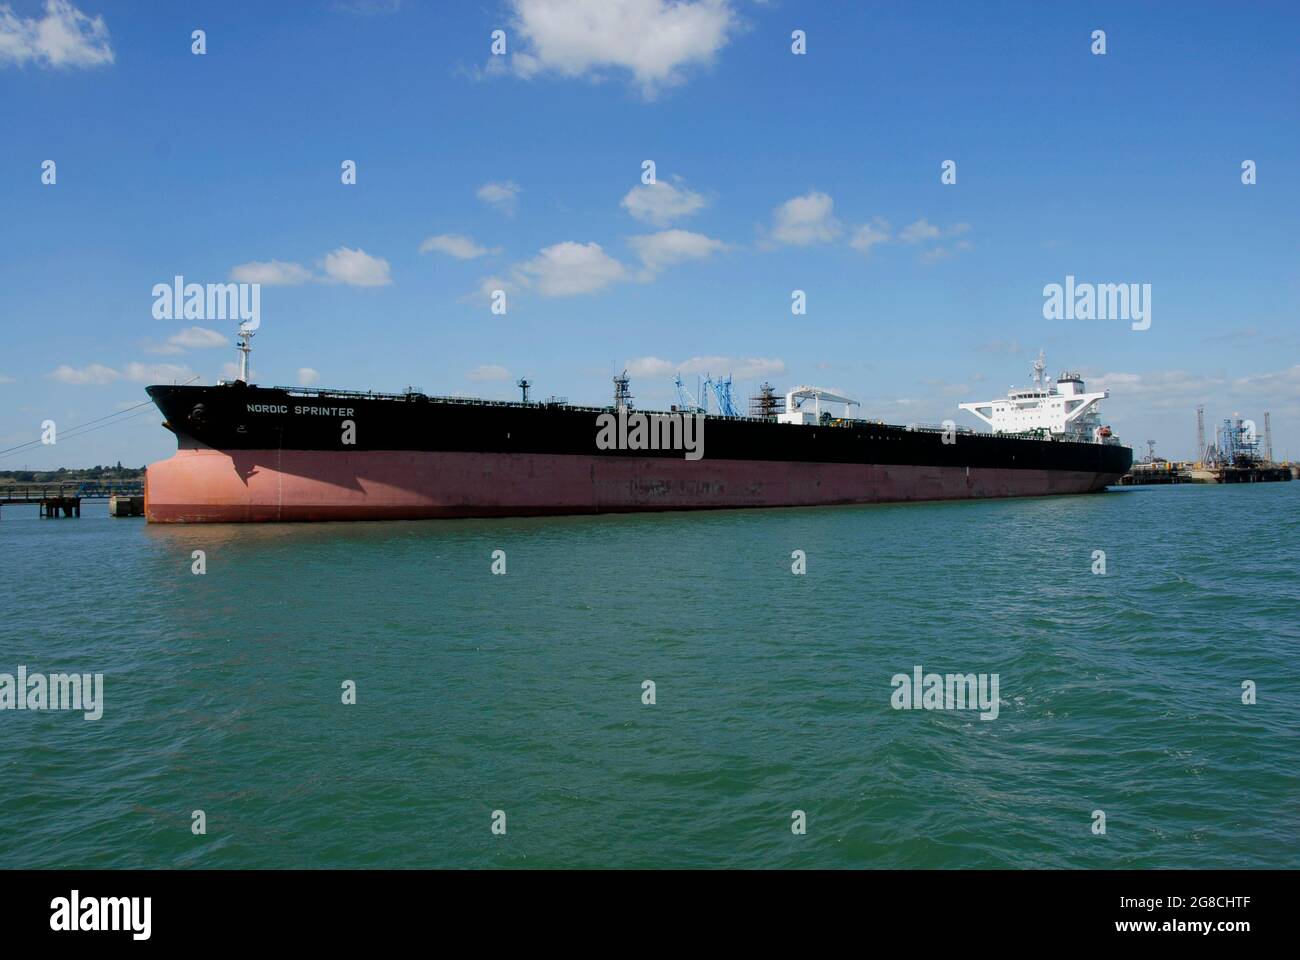 Crude oil tanker Nordic Sprinter moored in Southampton Water Stock Photo